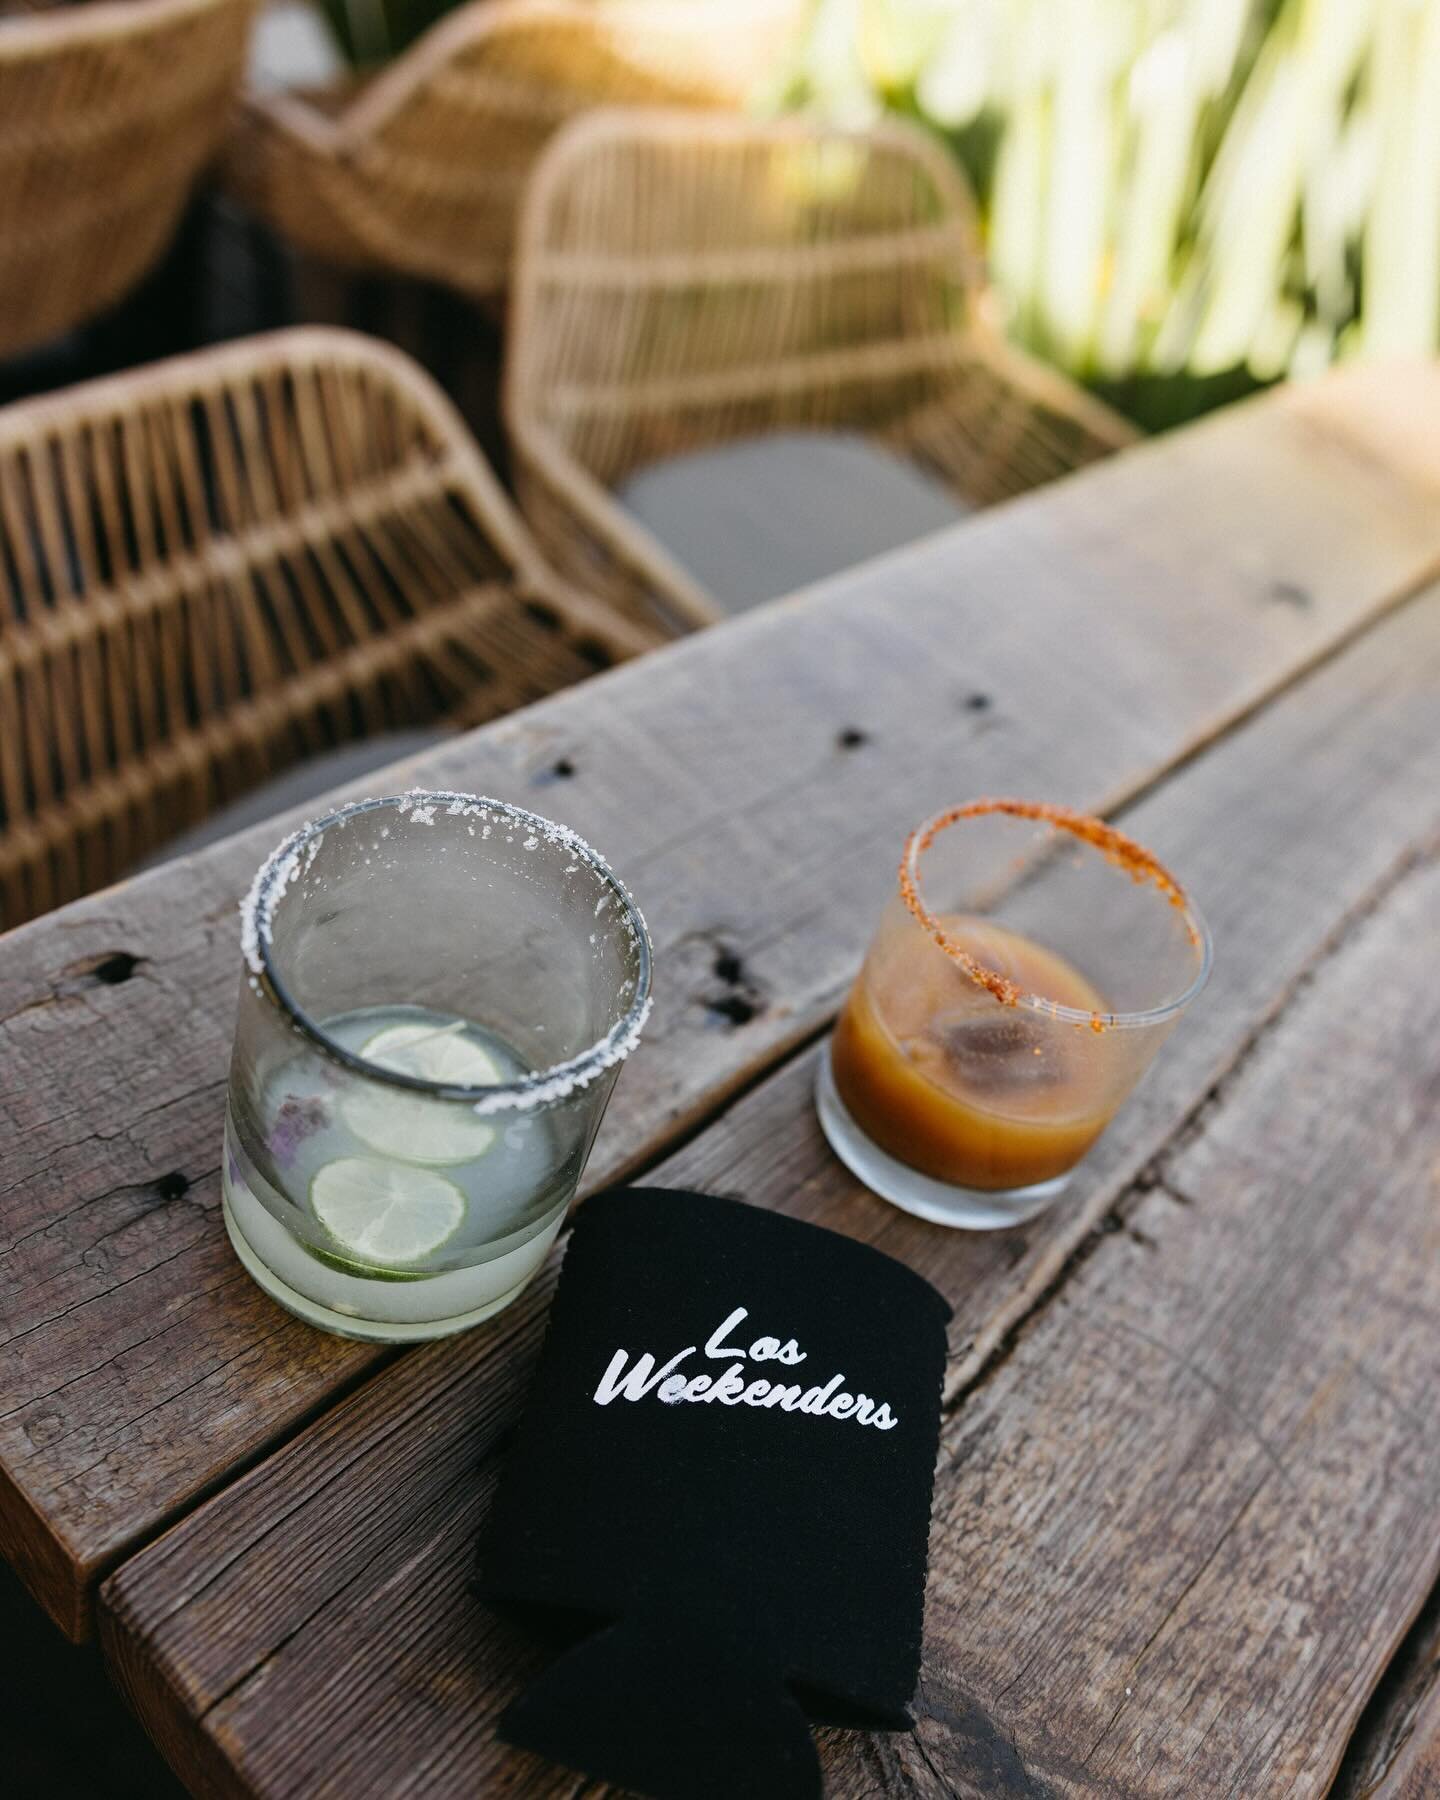 Summer months are coming! You can book a machine for your event well in advance to make sure it&rsquo;s reserved. Koozies also come with every rental!
-
#losweekenders | 📷: @erinwiesephoto